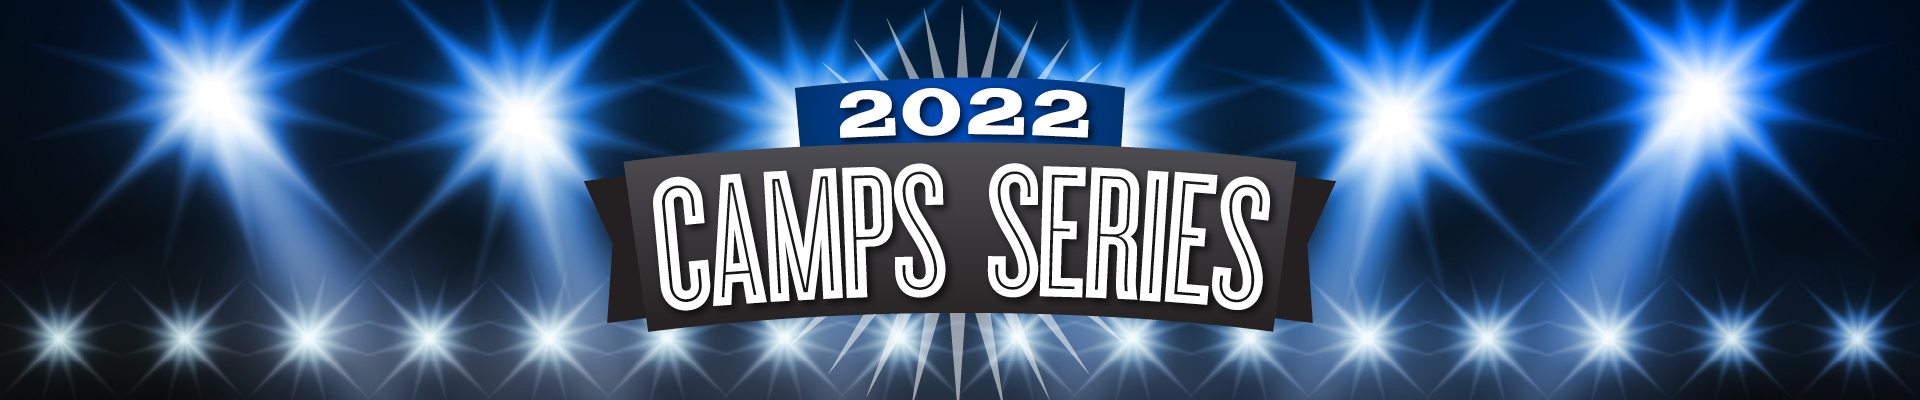 Camps Series Banner